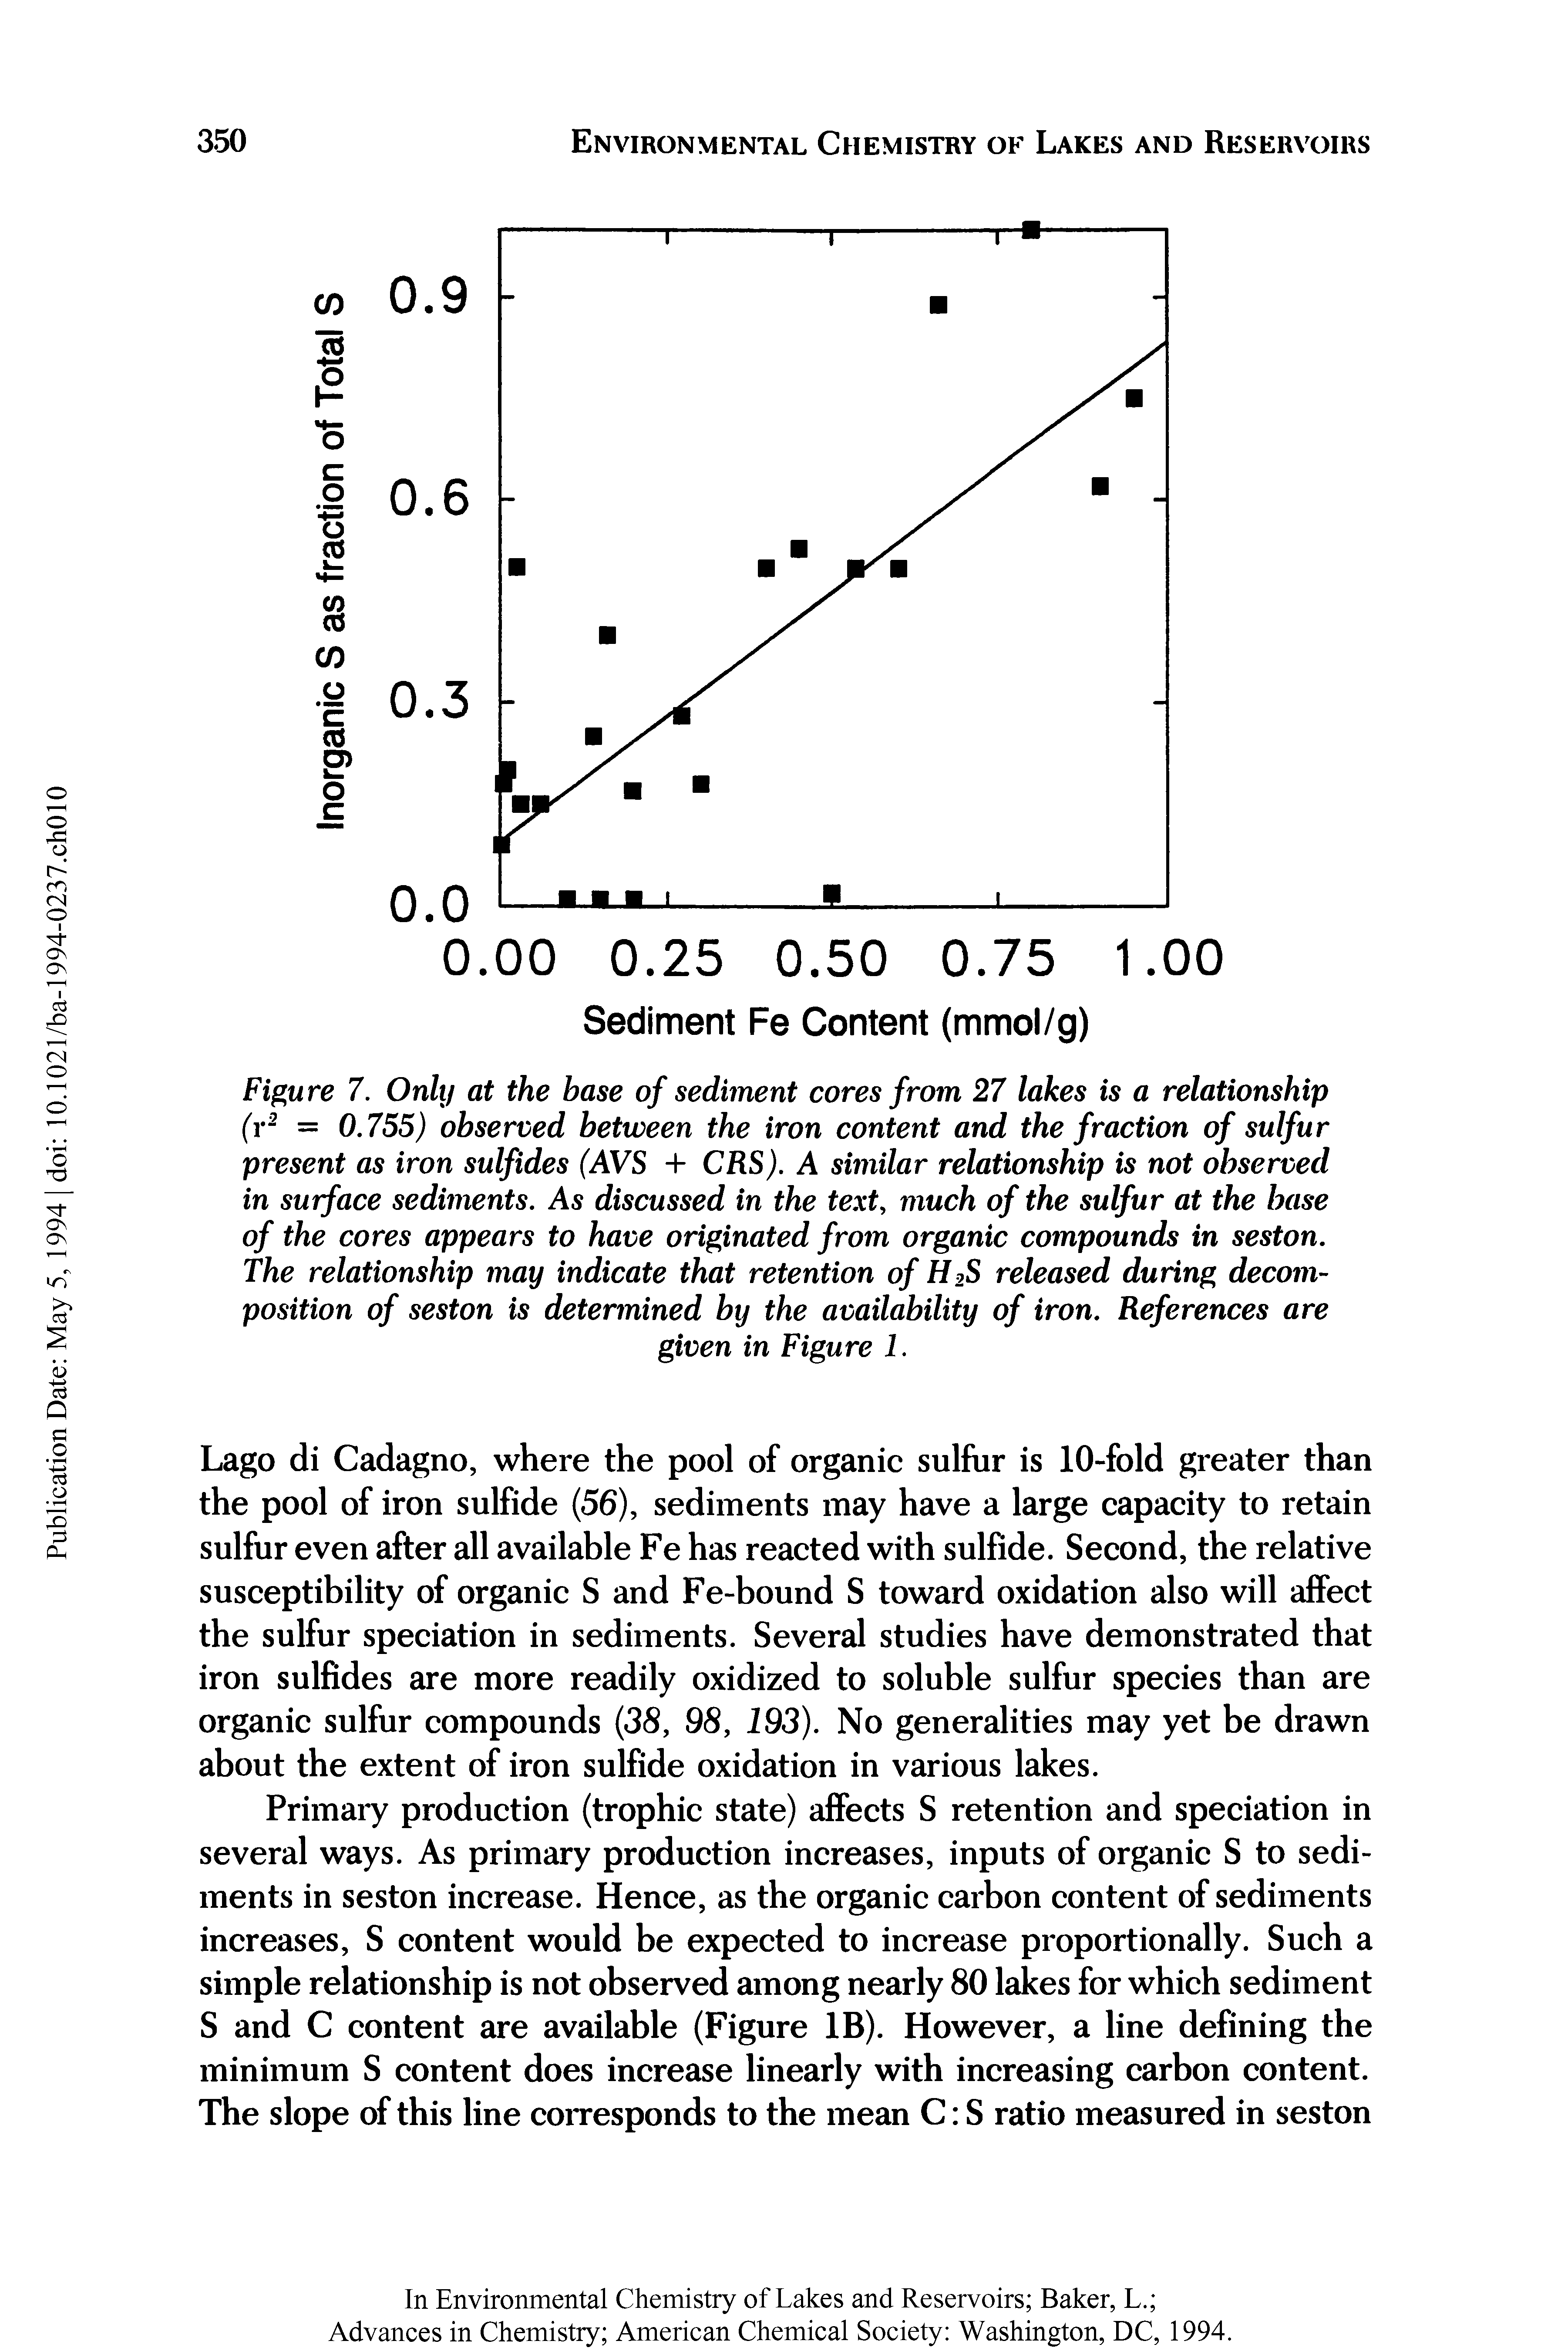 Figure 7. Only at the base of sediment cores from 27 lakes is a relationship (r2 = 0.755) observed between the iron content and the fraction of sulfur present as iron sulfides (AVS + CRS). A similar relationship is not observed in surface sediments. As discussed in the text, much of the sulfur at the base of the cores appears to have originated from organic compounds in seston. The relationship may indicate that retention of H2S released during decomposition of seston is determined by the availability of iron. References are...